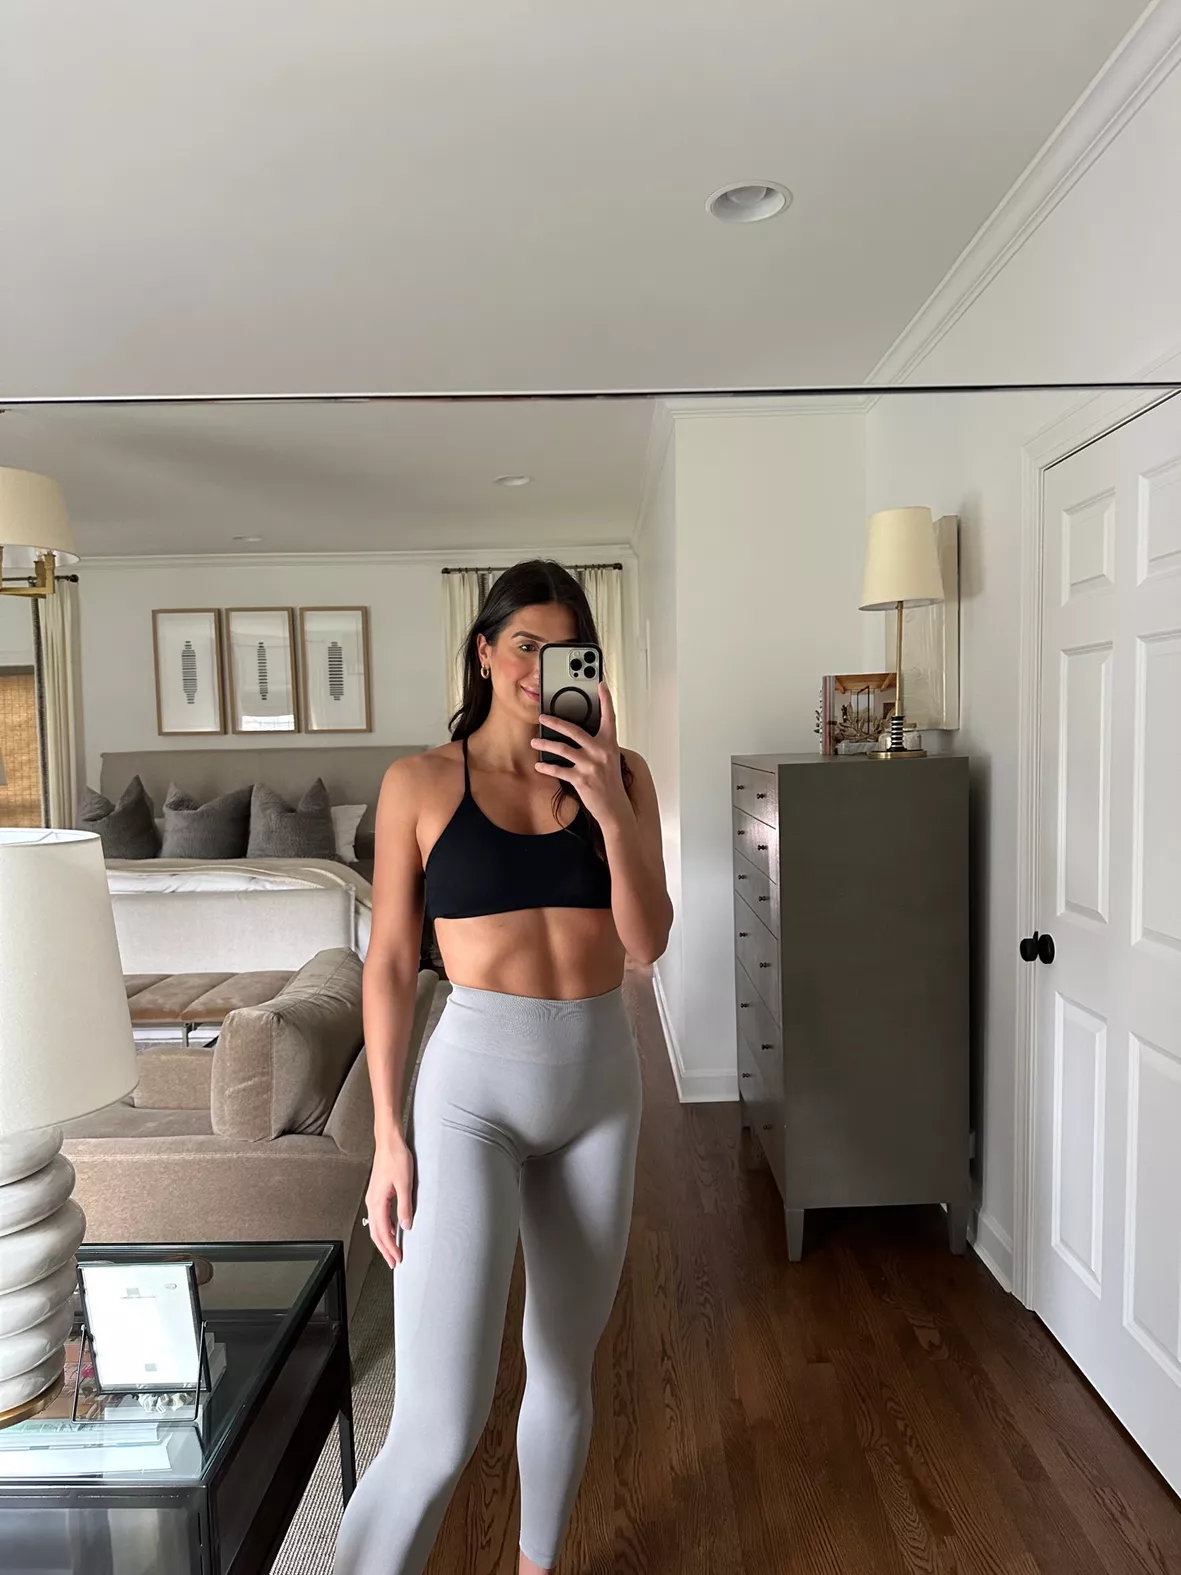 Yoga Pants Have Taken Over The World  Womens workout outfits, Cute workout  outfits, Fitness girls